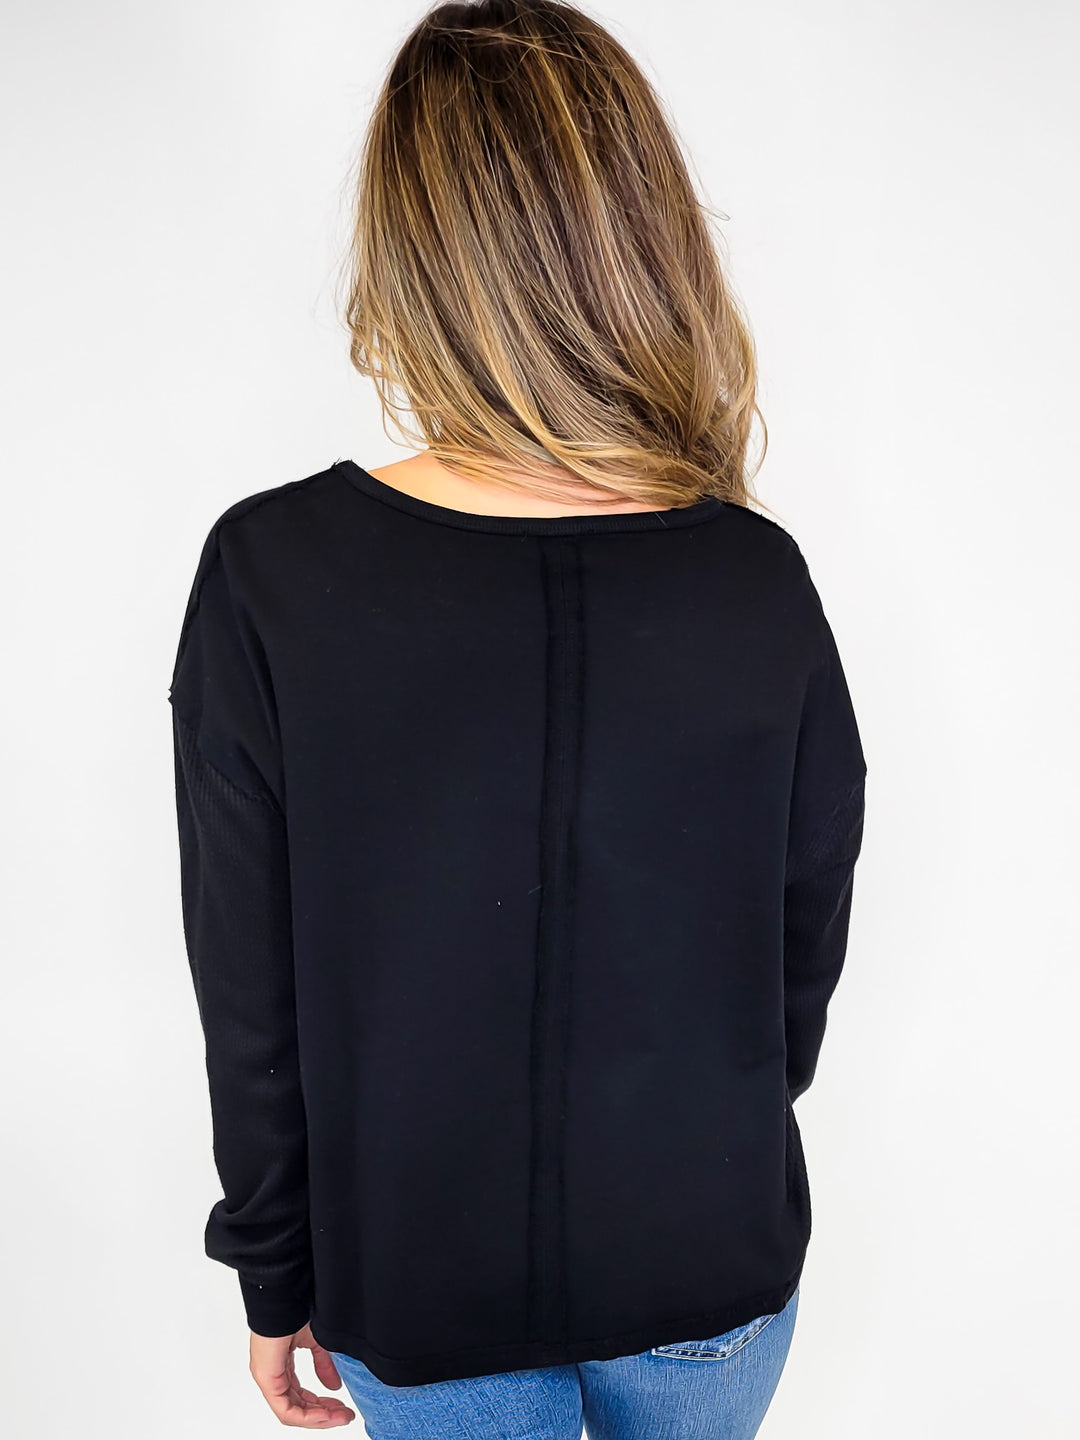 FRENCH TERRY WAFFLE KNIT LONG SLEEVE TOP - BLACK